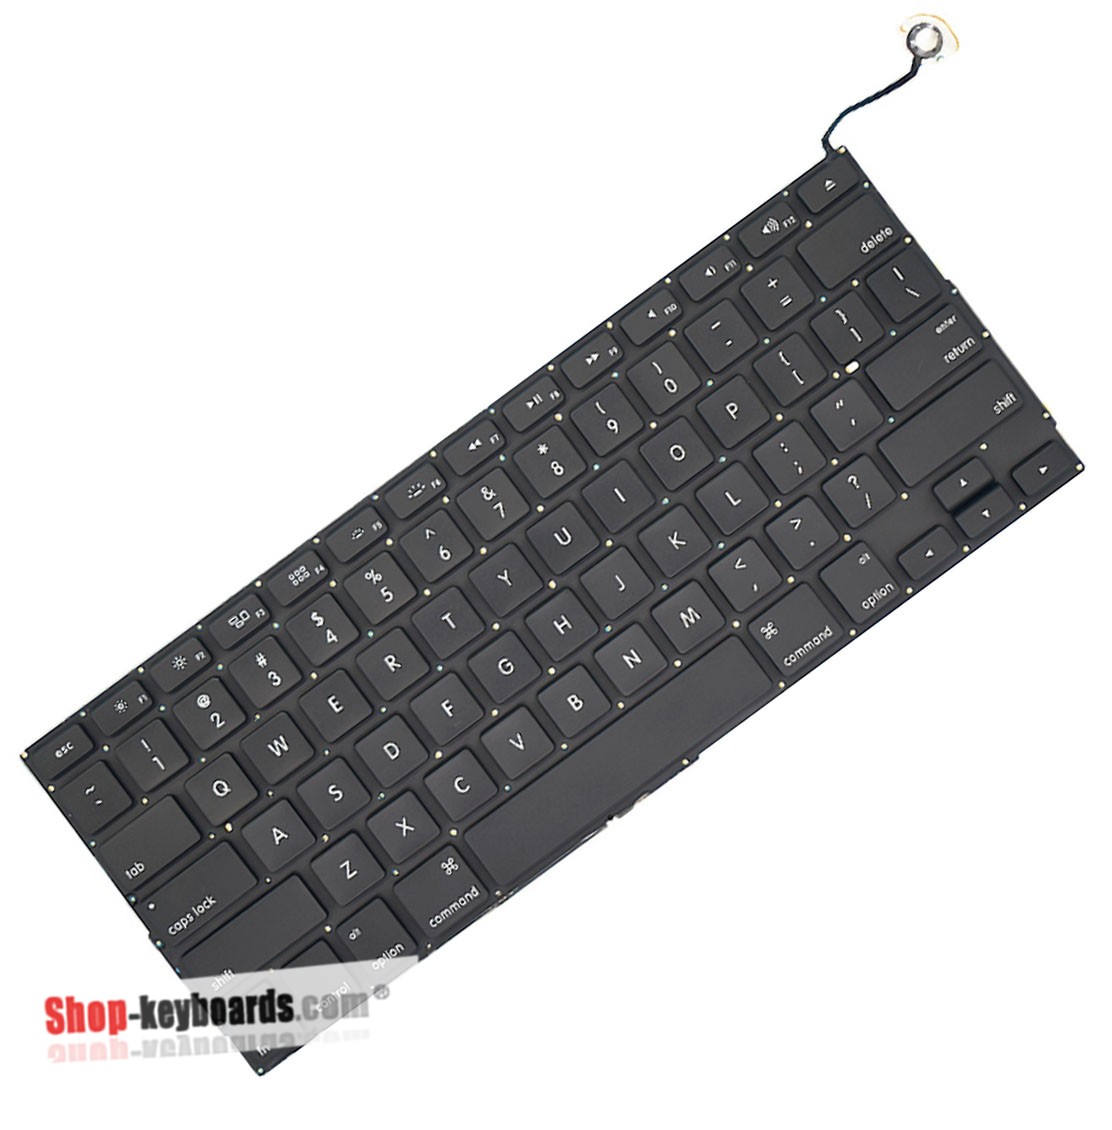 Apple Macbook Pro Unibody 15 inch MB986 Keyboard replacement